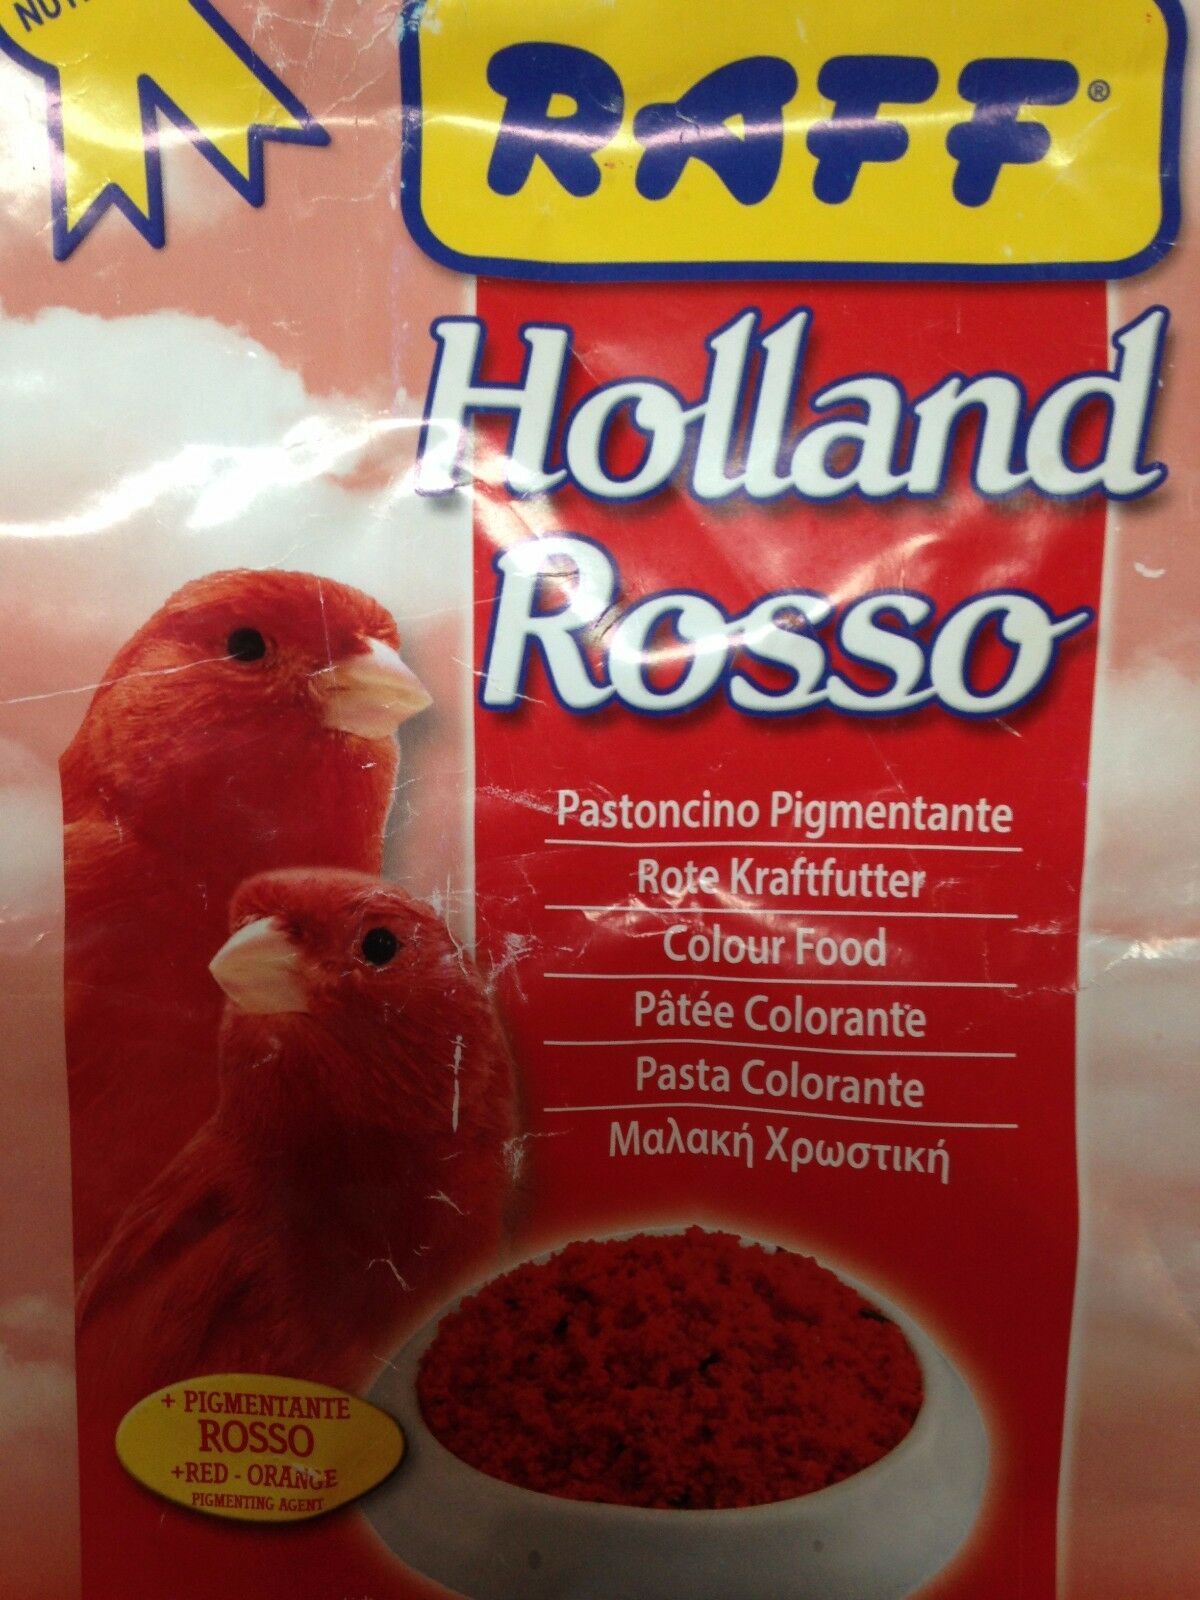 Red Food/condition Nestling Egg Red Food Treat 5 Lb "raff Hollando Rosso"